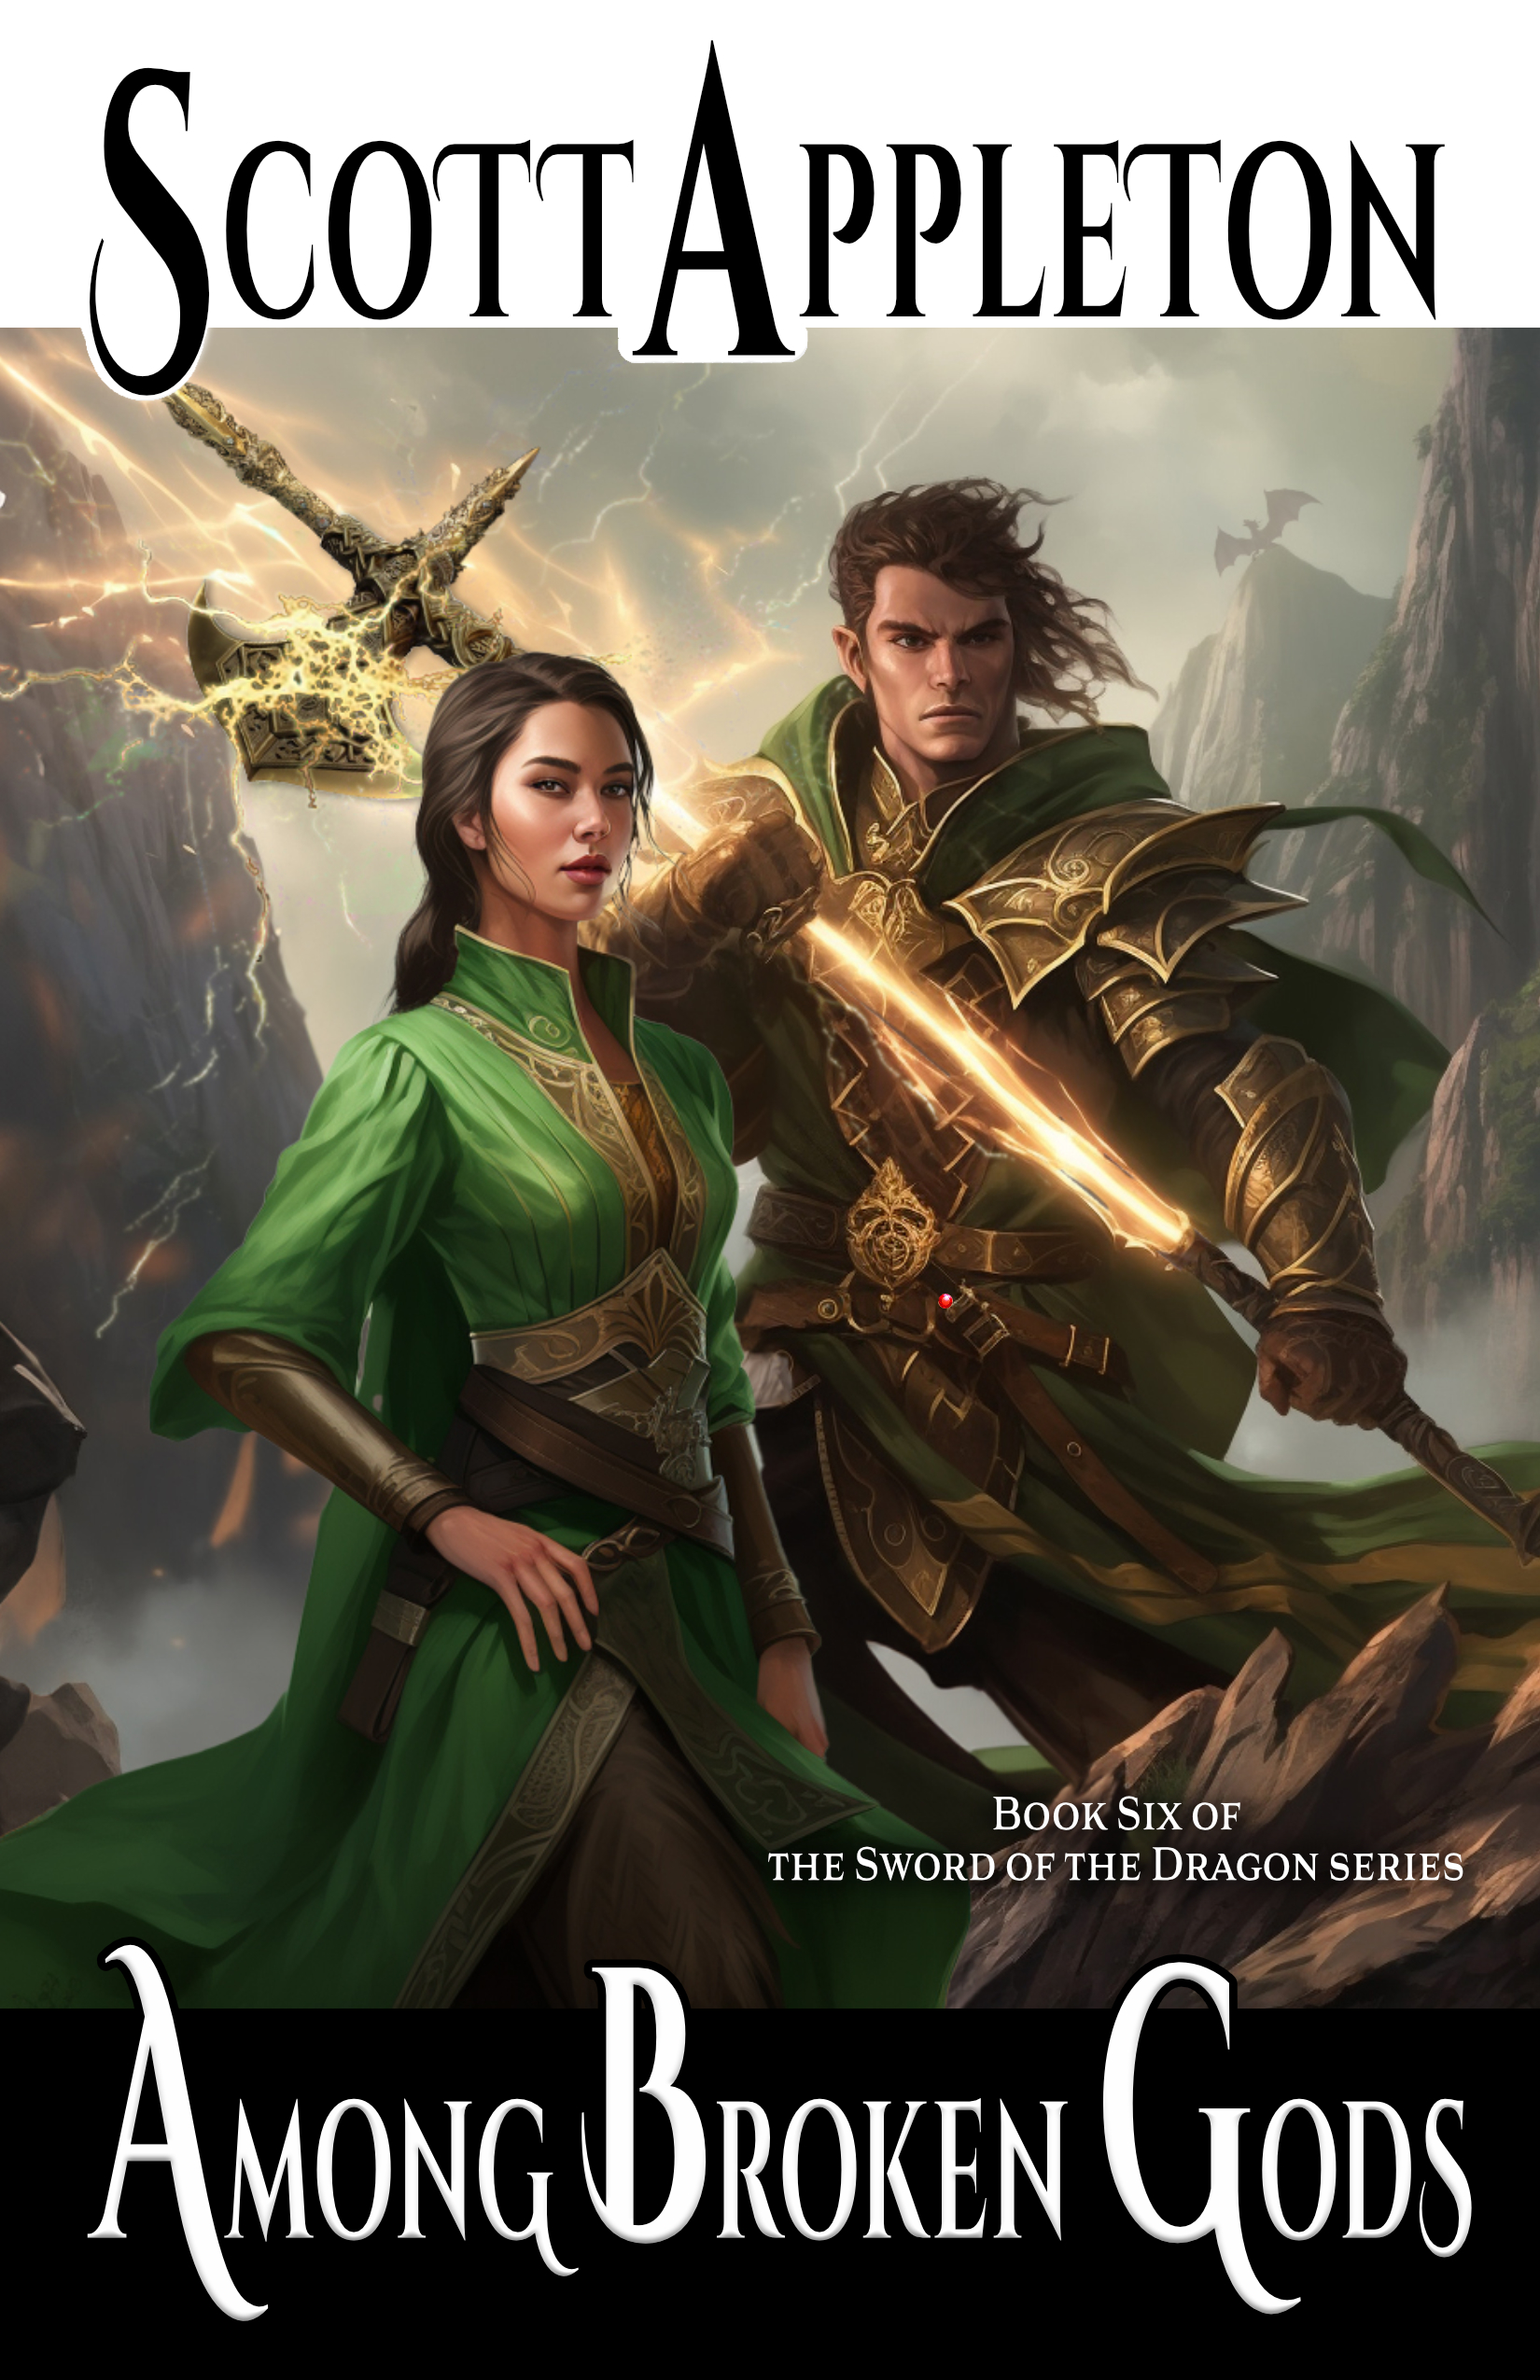 Cover reveal! The Sword of the Dragon Series (book 6) Among Broken Gods